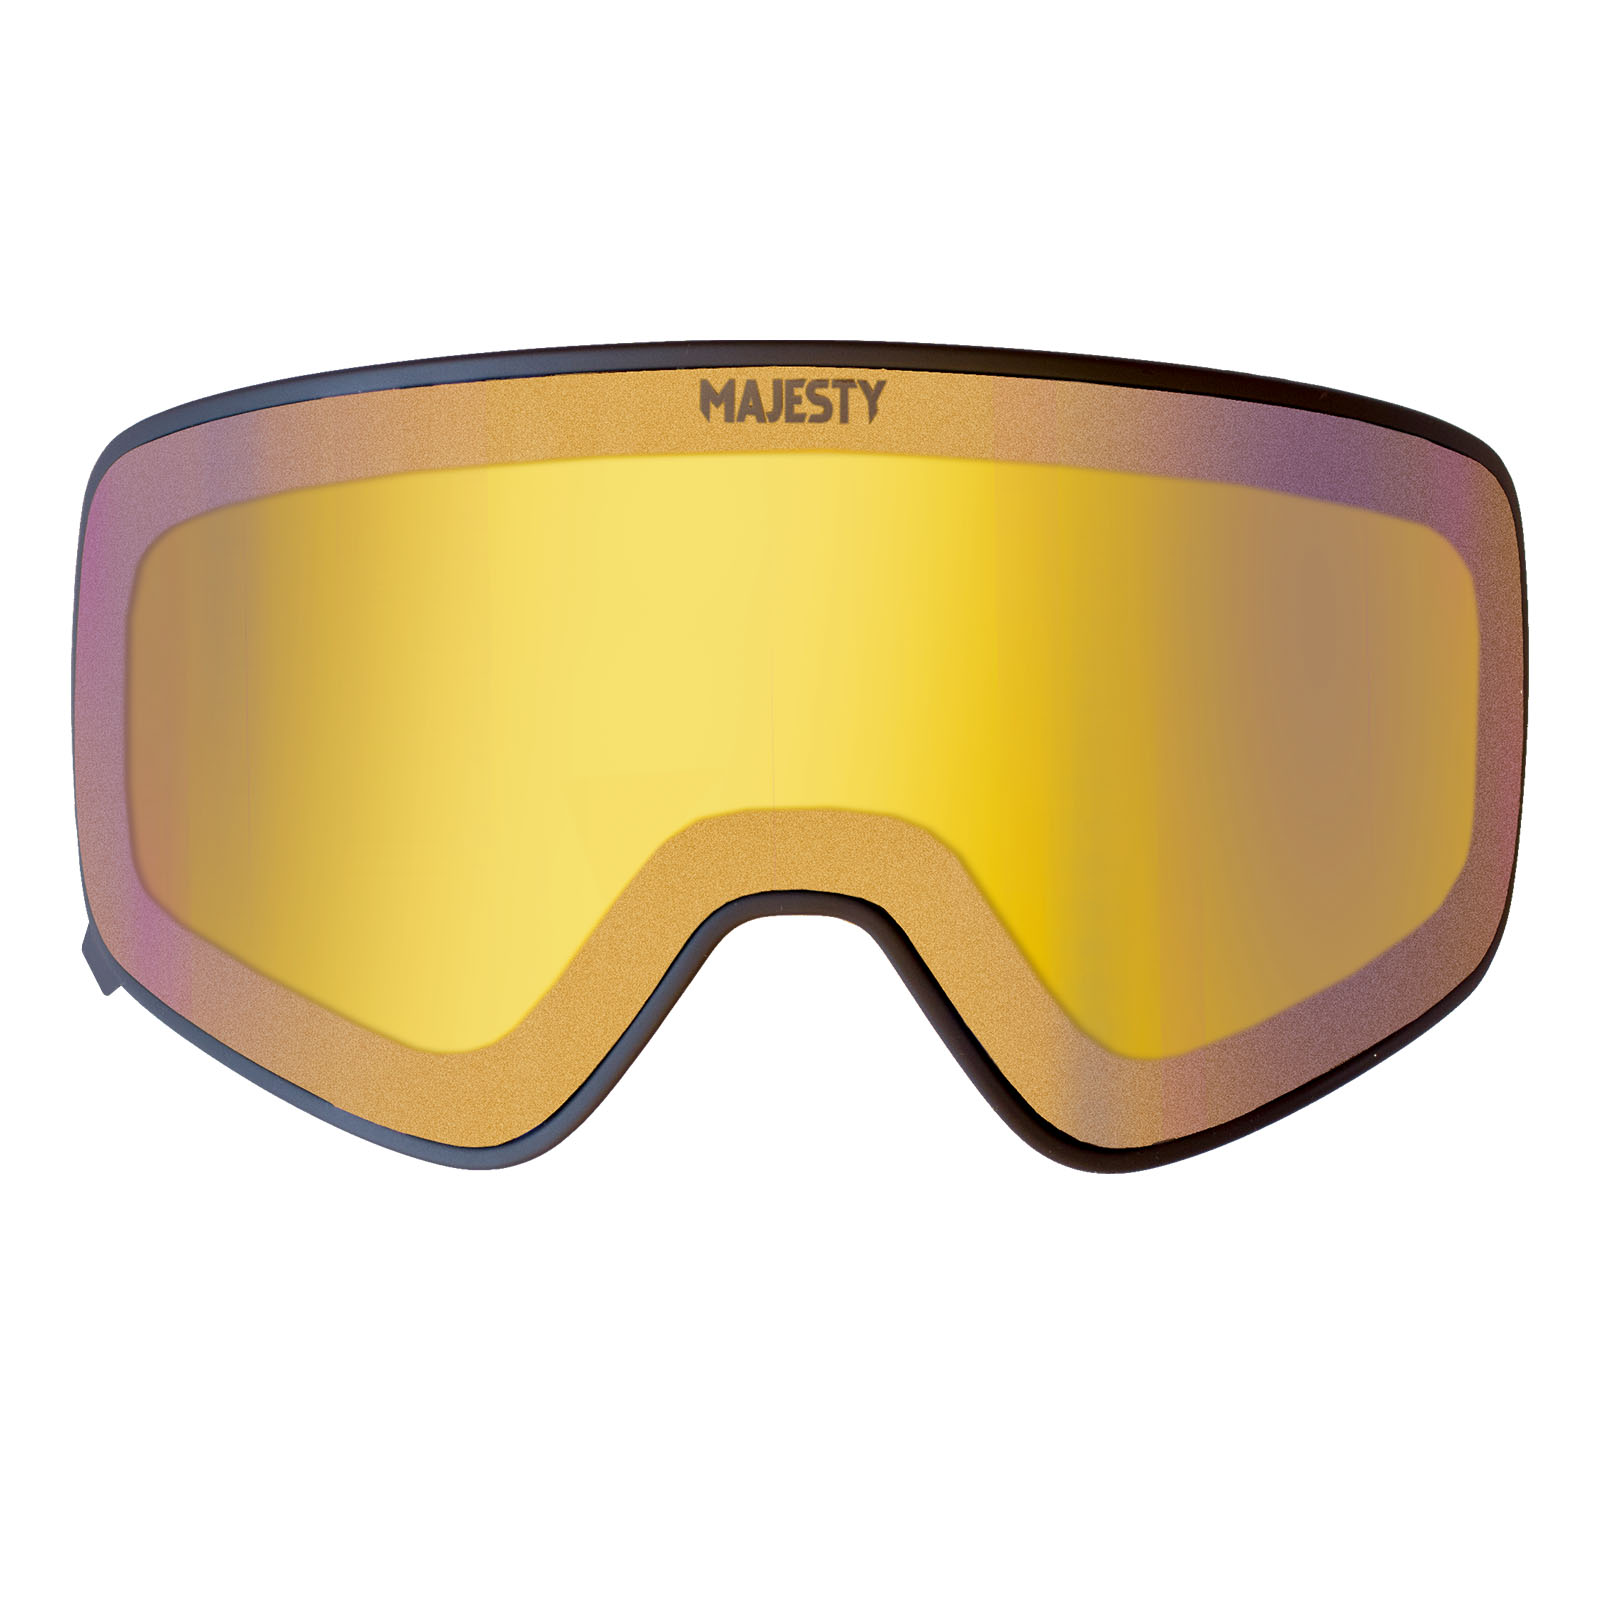 black Goggles frame MAJESTY MAJESTY - / SKIS Official lens Moonstone + XENON - Force C Online Store black Skis HD The pearl Ski Magnetic MAJESTY -